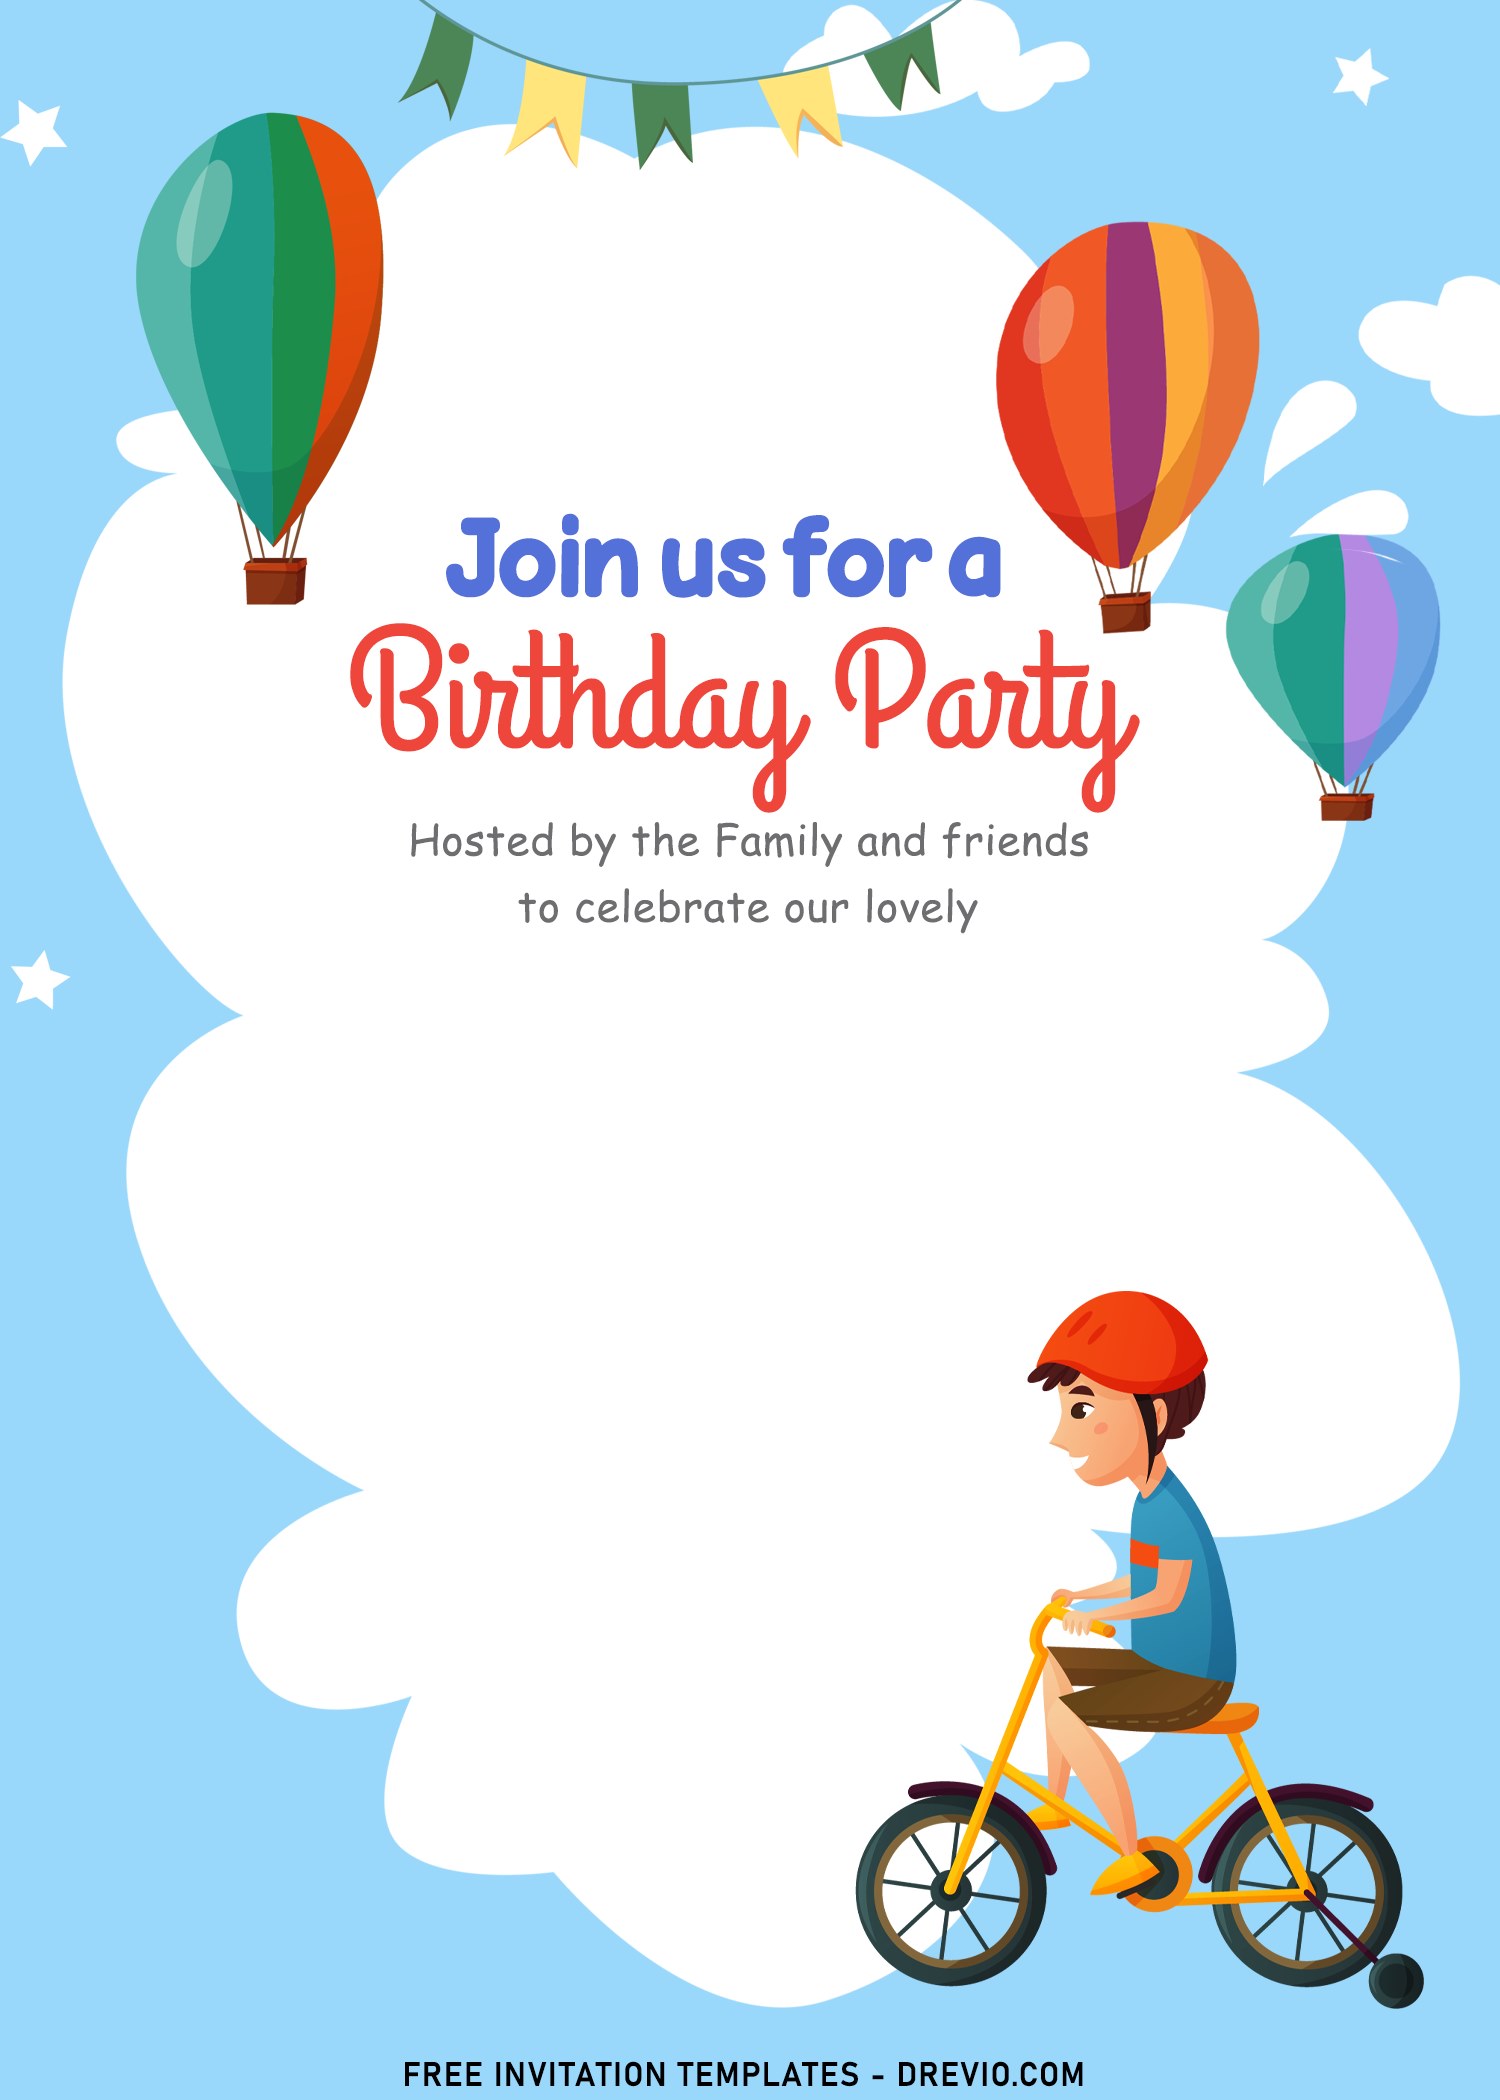 Premium Vector | Birthday party invitation template with cake